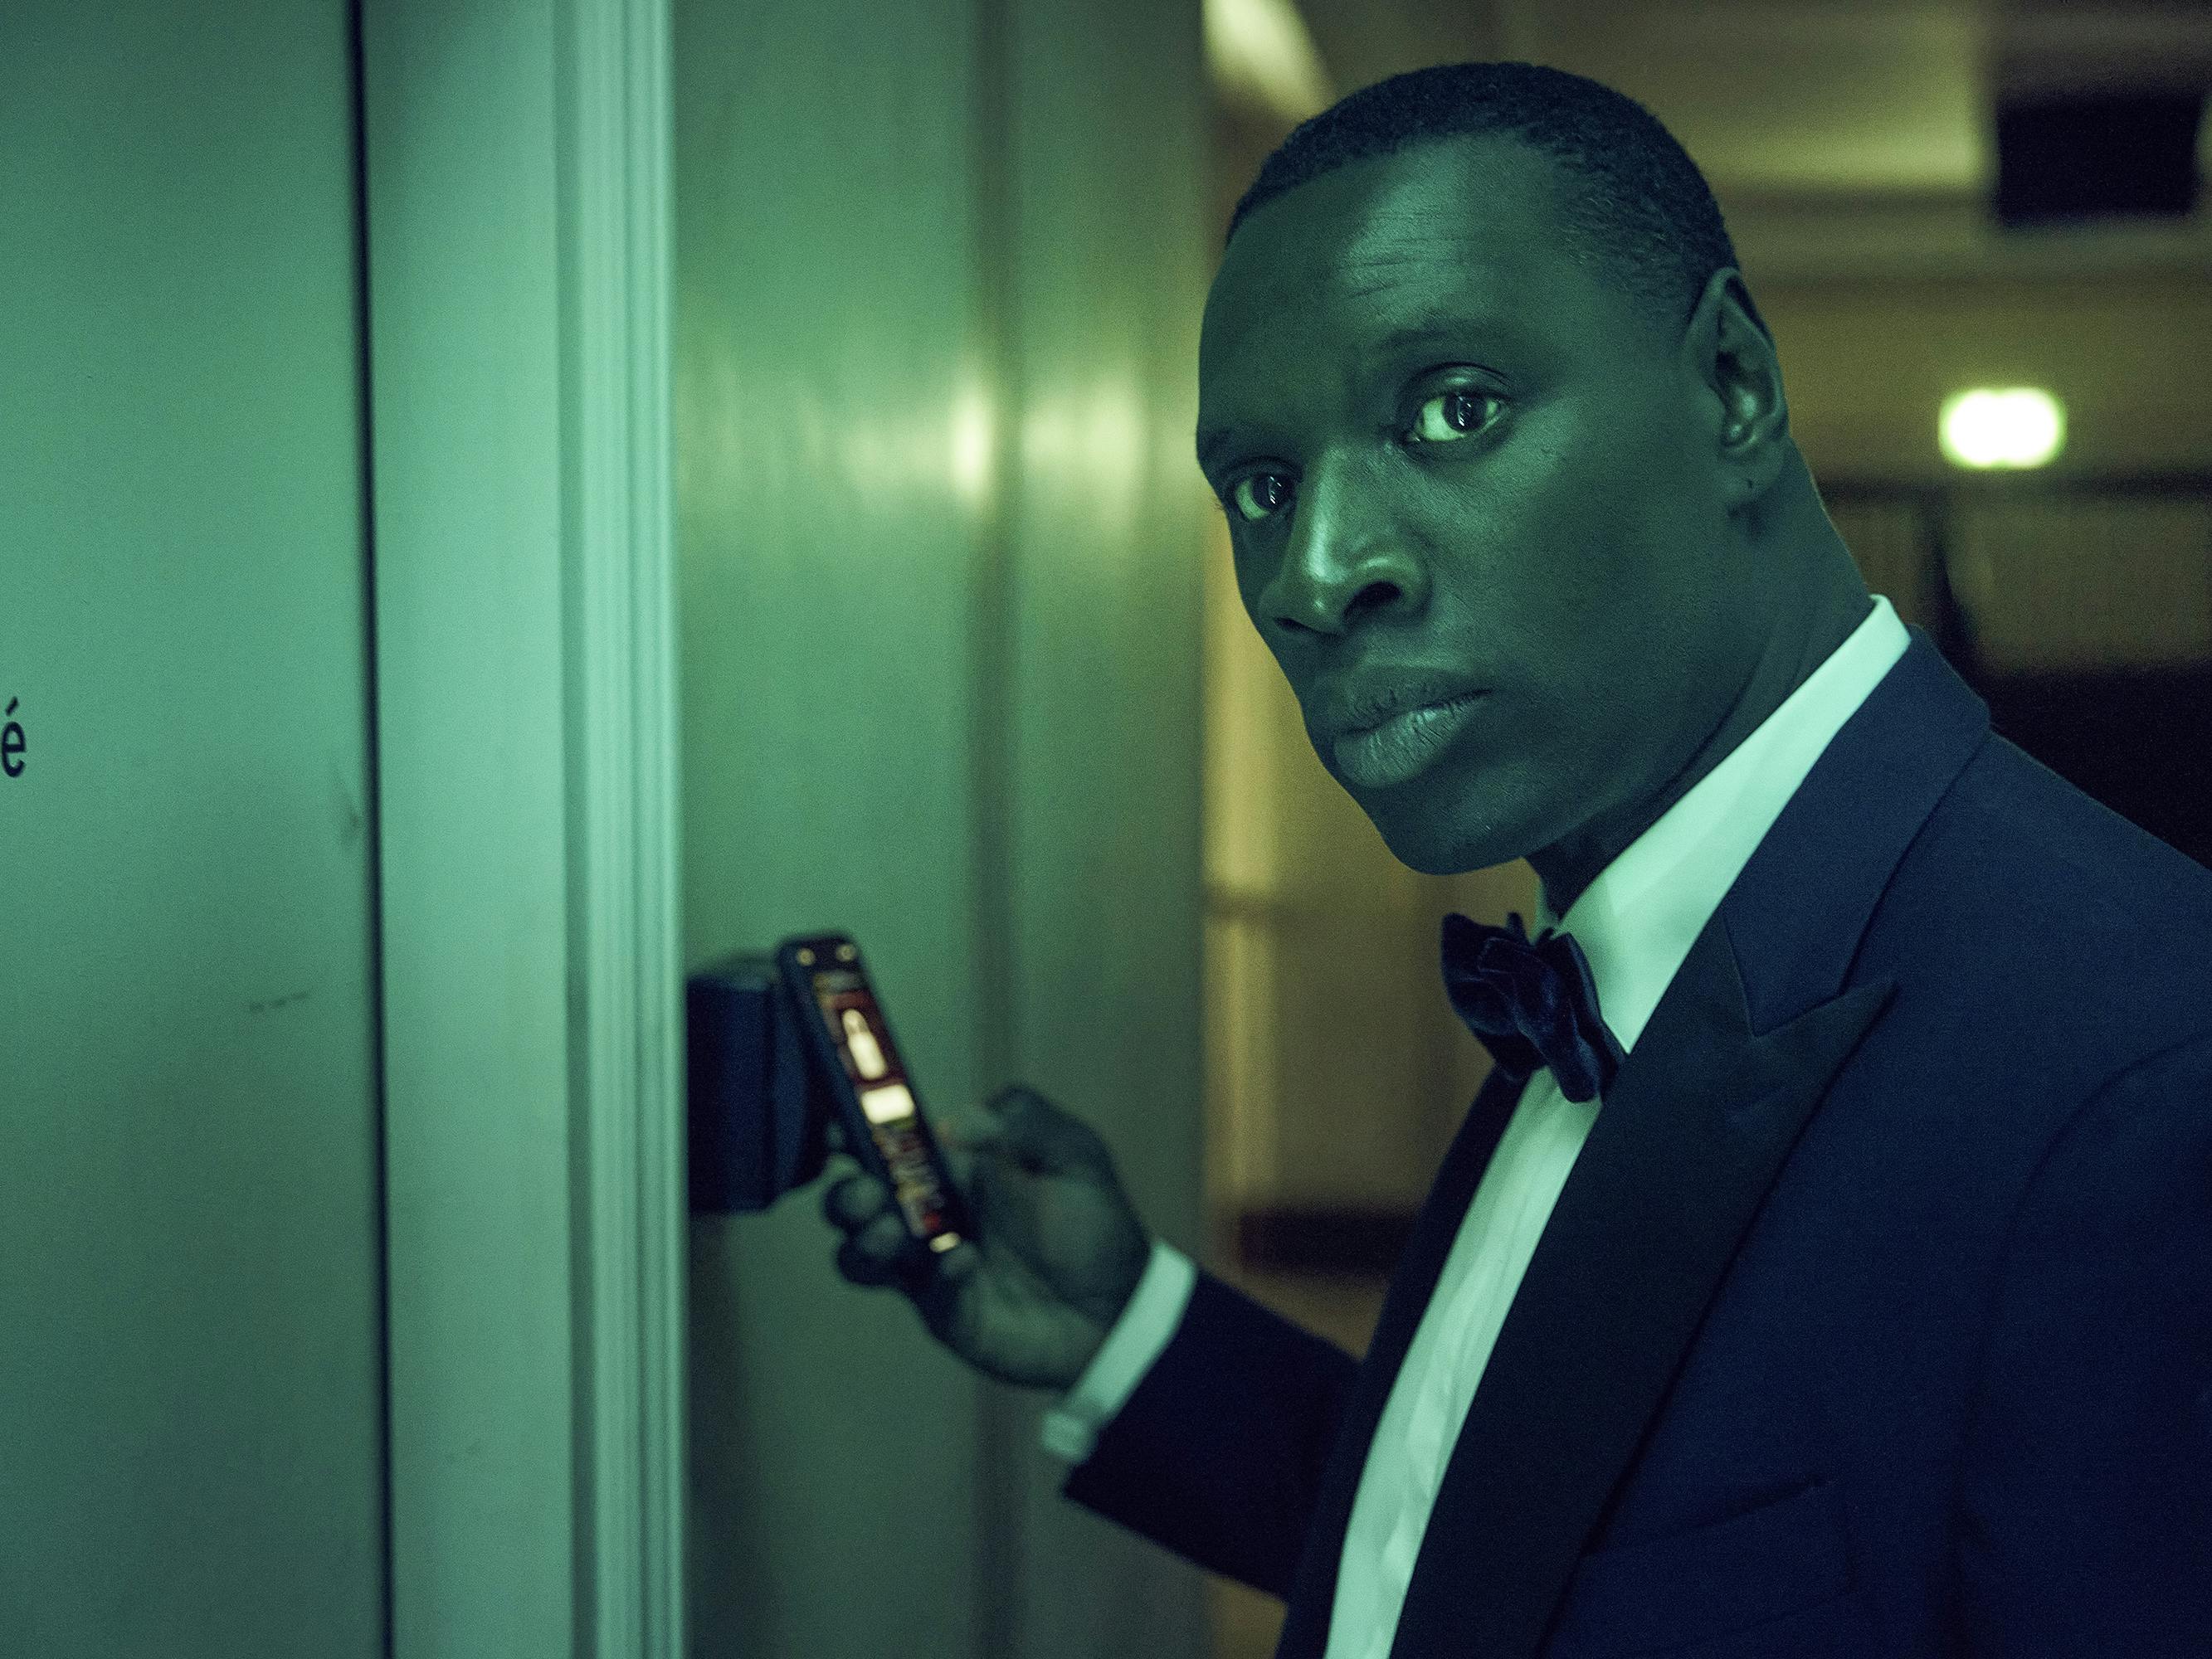 Assane Diop (Omar Sy) looks suave and sneaky in a black tux and bowtie. 